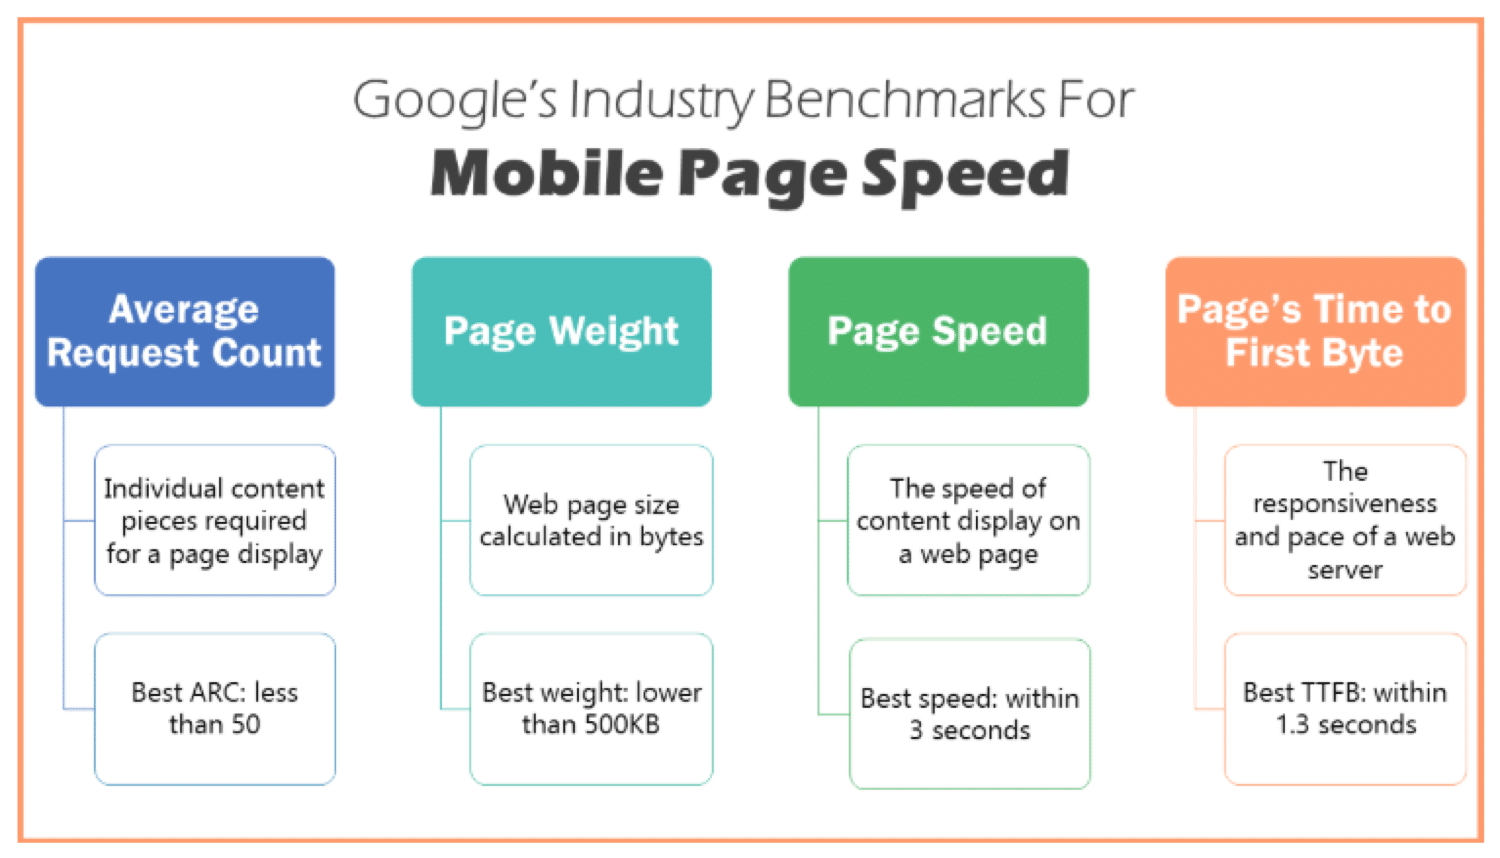 Mobile page speed benchmarks